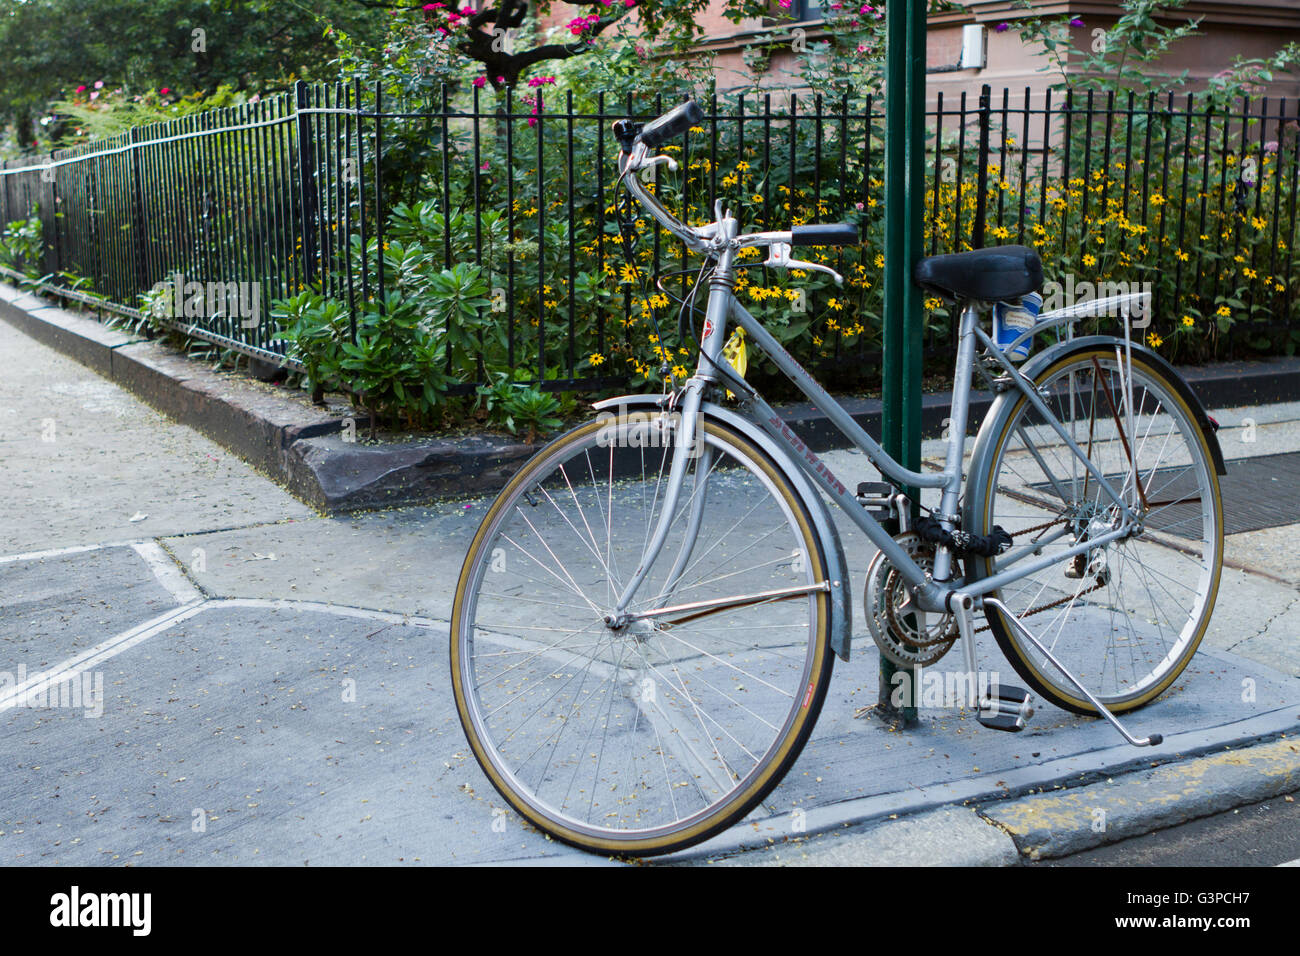 Bicycle leaning on a sign post with the coffee cup left over from commute in an urban neighborhood sidewalks and gardens Stock Photo